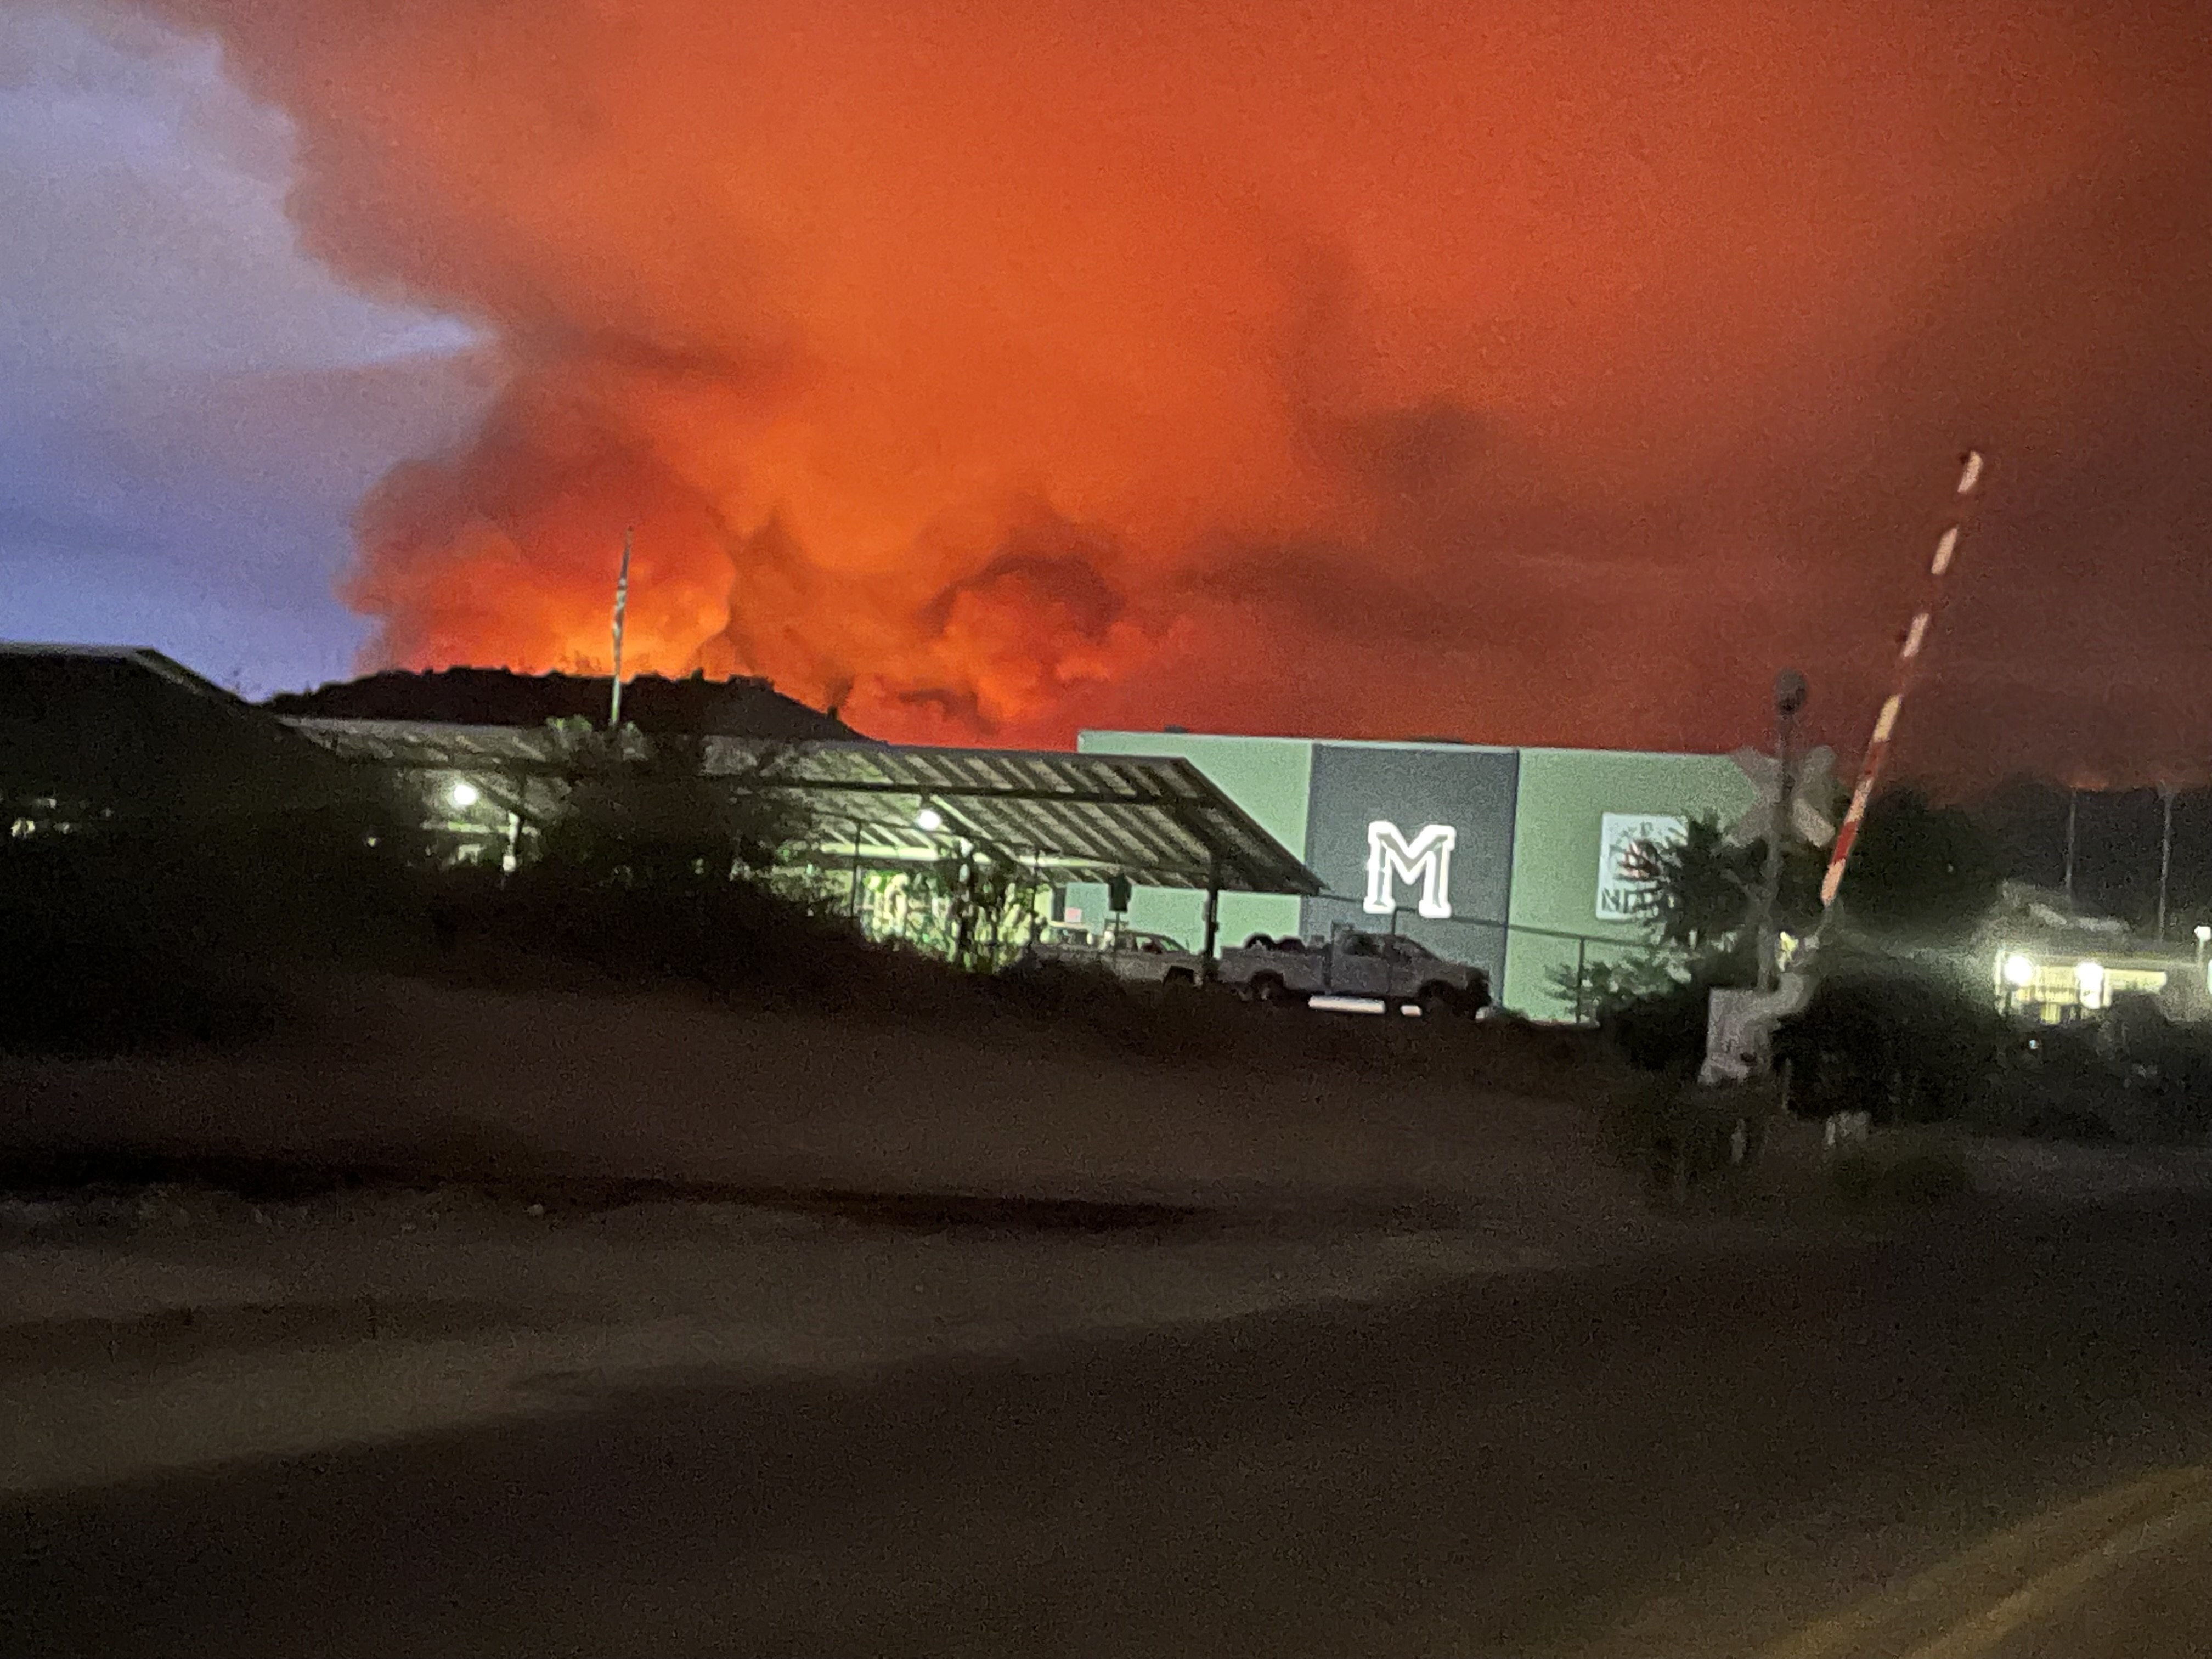 Cover Photo: Early morning clouds illuminated by the light from wild fires near Miami Junior/Senior High School in Arizona.  Photo Credit: Glen Lineberry, who told us 